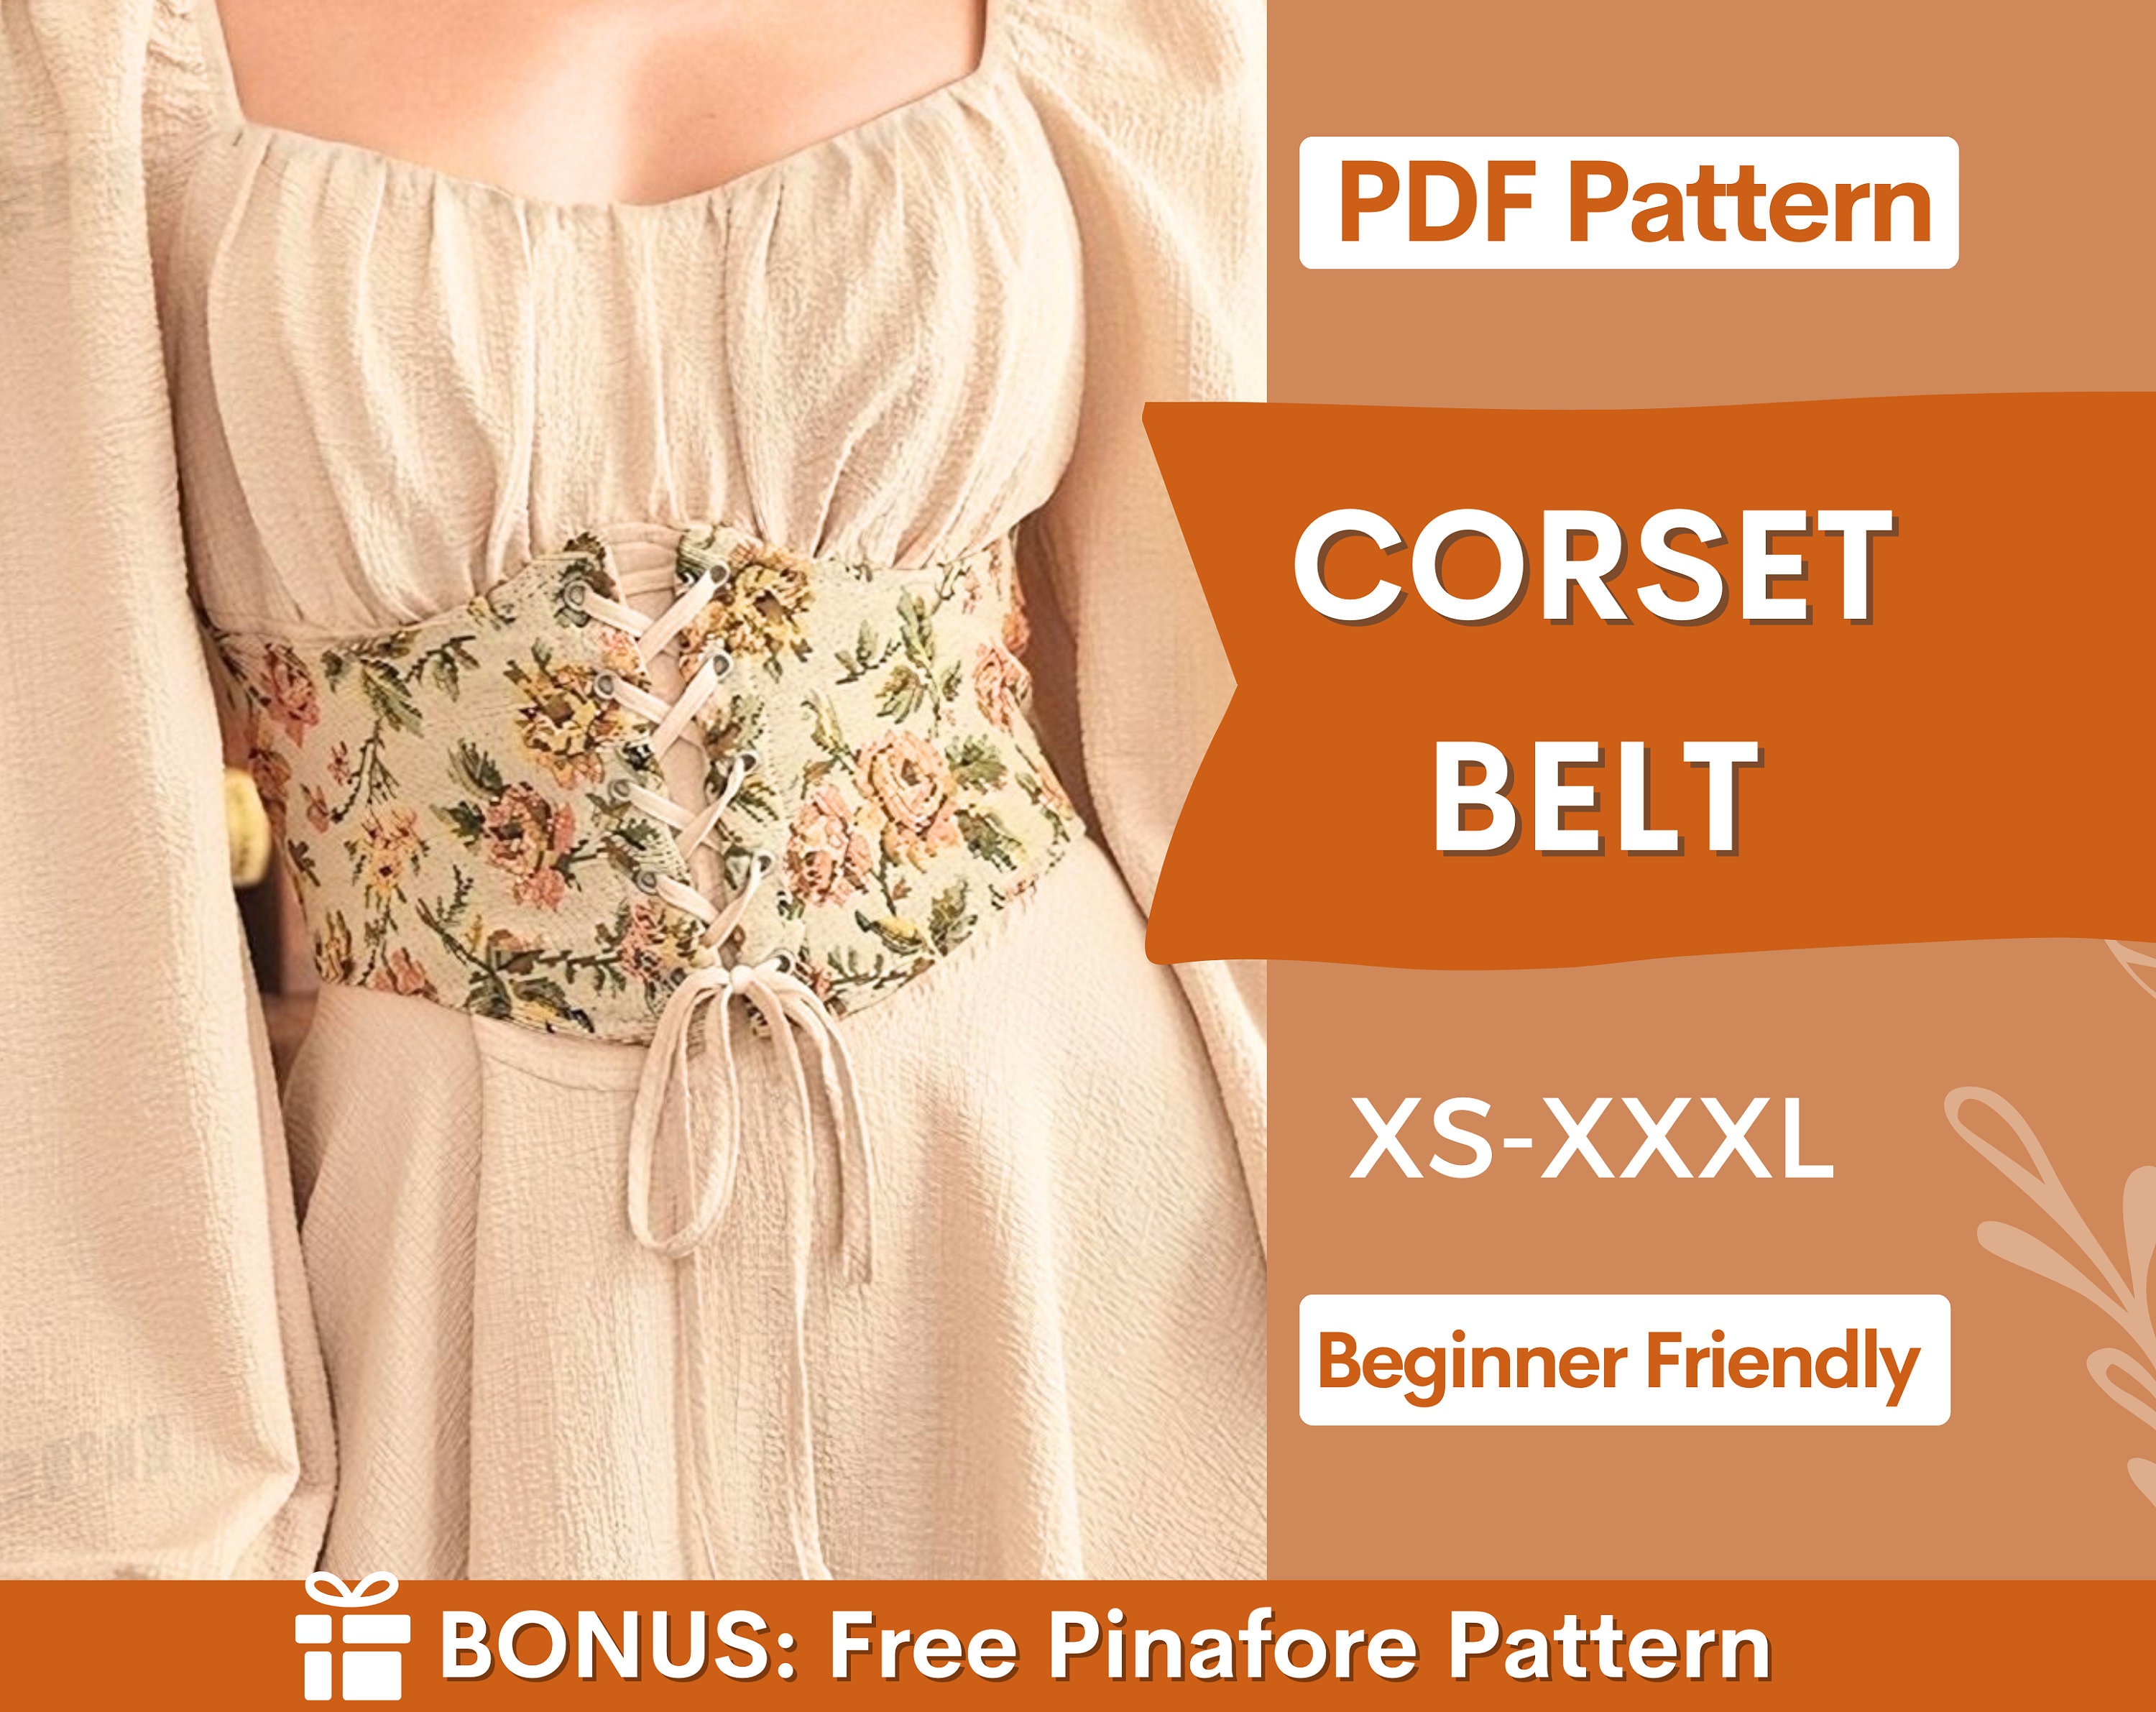 Romantic Cottagecore Corset Top with Sleeveojco0001 PDF A4,A0,LETTER Sewing  Patterns11 Sizes video, Photos Tutorial -  Denmark